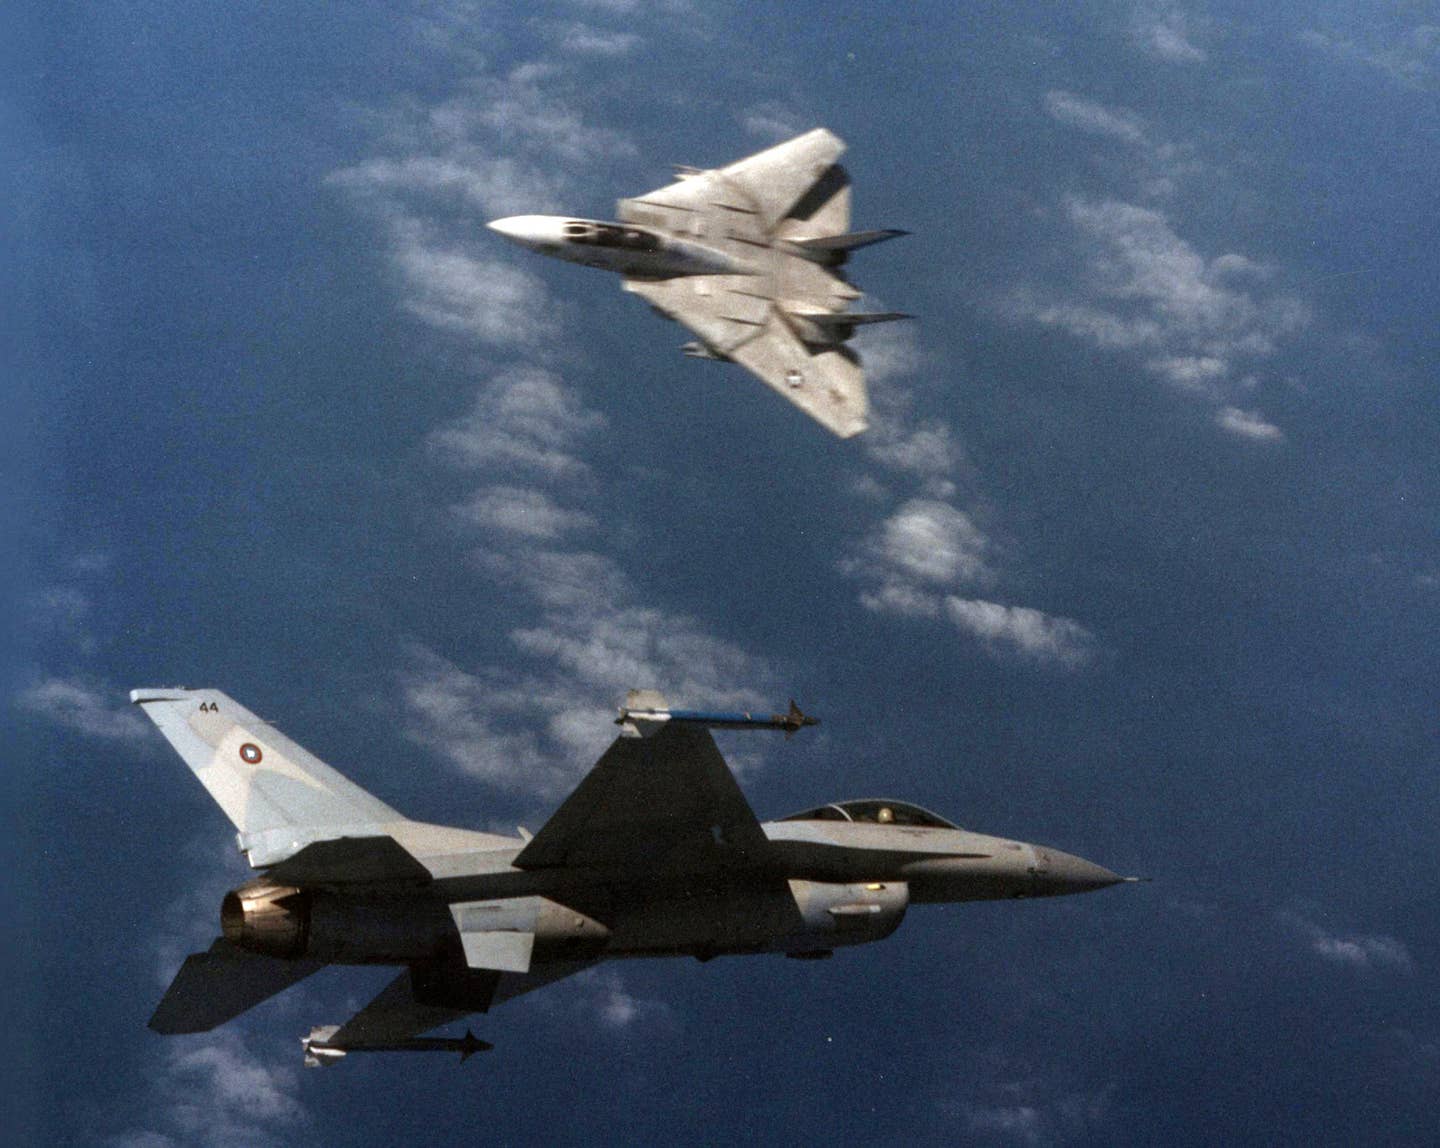 A U.S. Navy F-14A engages an F-16N&nbsp;aggressor aircraft during training at the Navy Fighter Weapons School, or TOPGUN, at Naval Air Station Miramar, California, in 1989. <em>U.S. Navy</em>